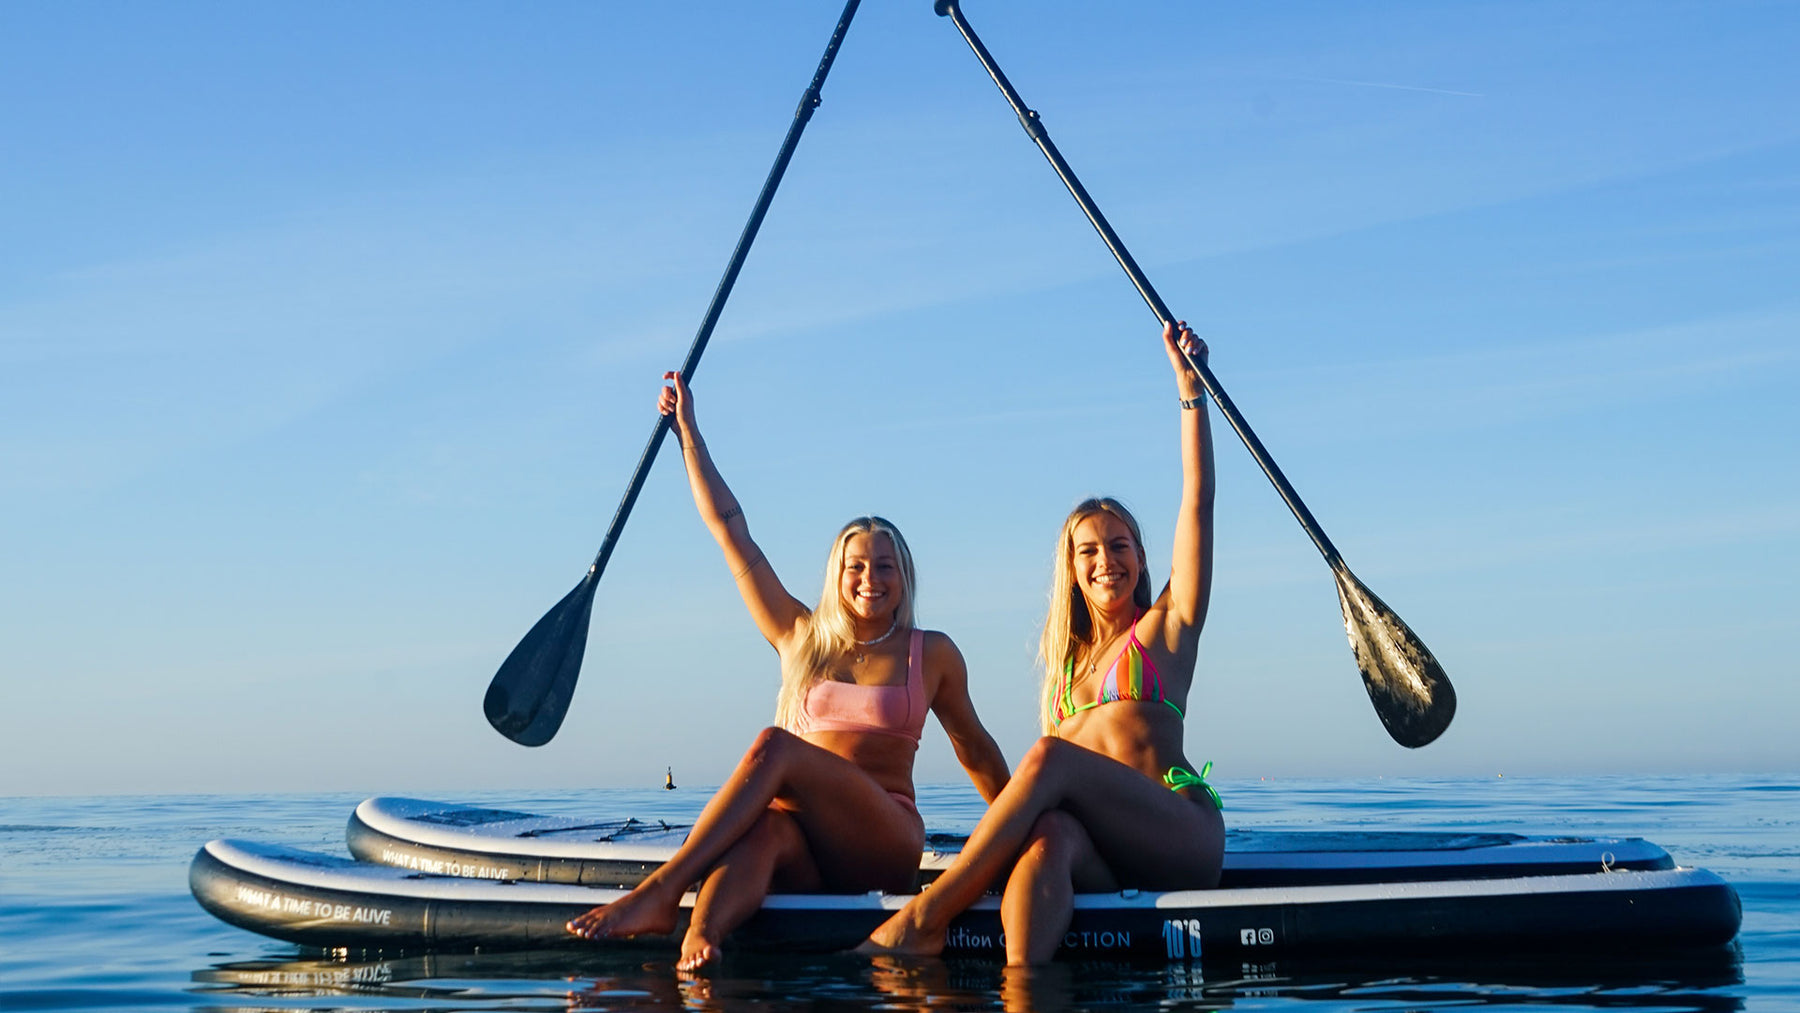 Beginners paddle boarding on inflatable Beachbum® The First Edition paddle boards